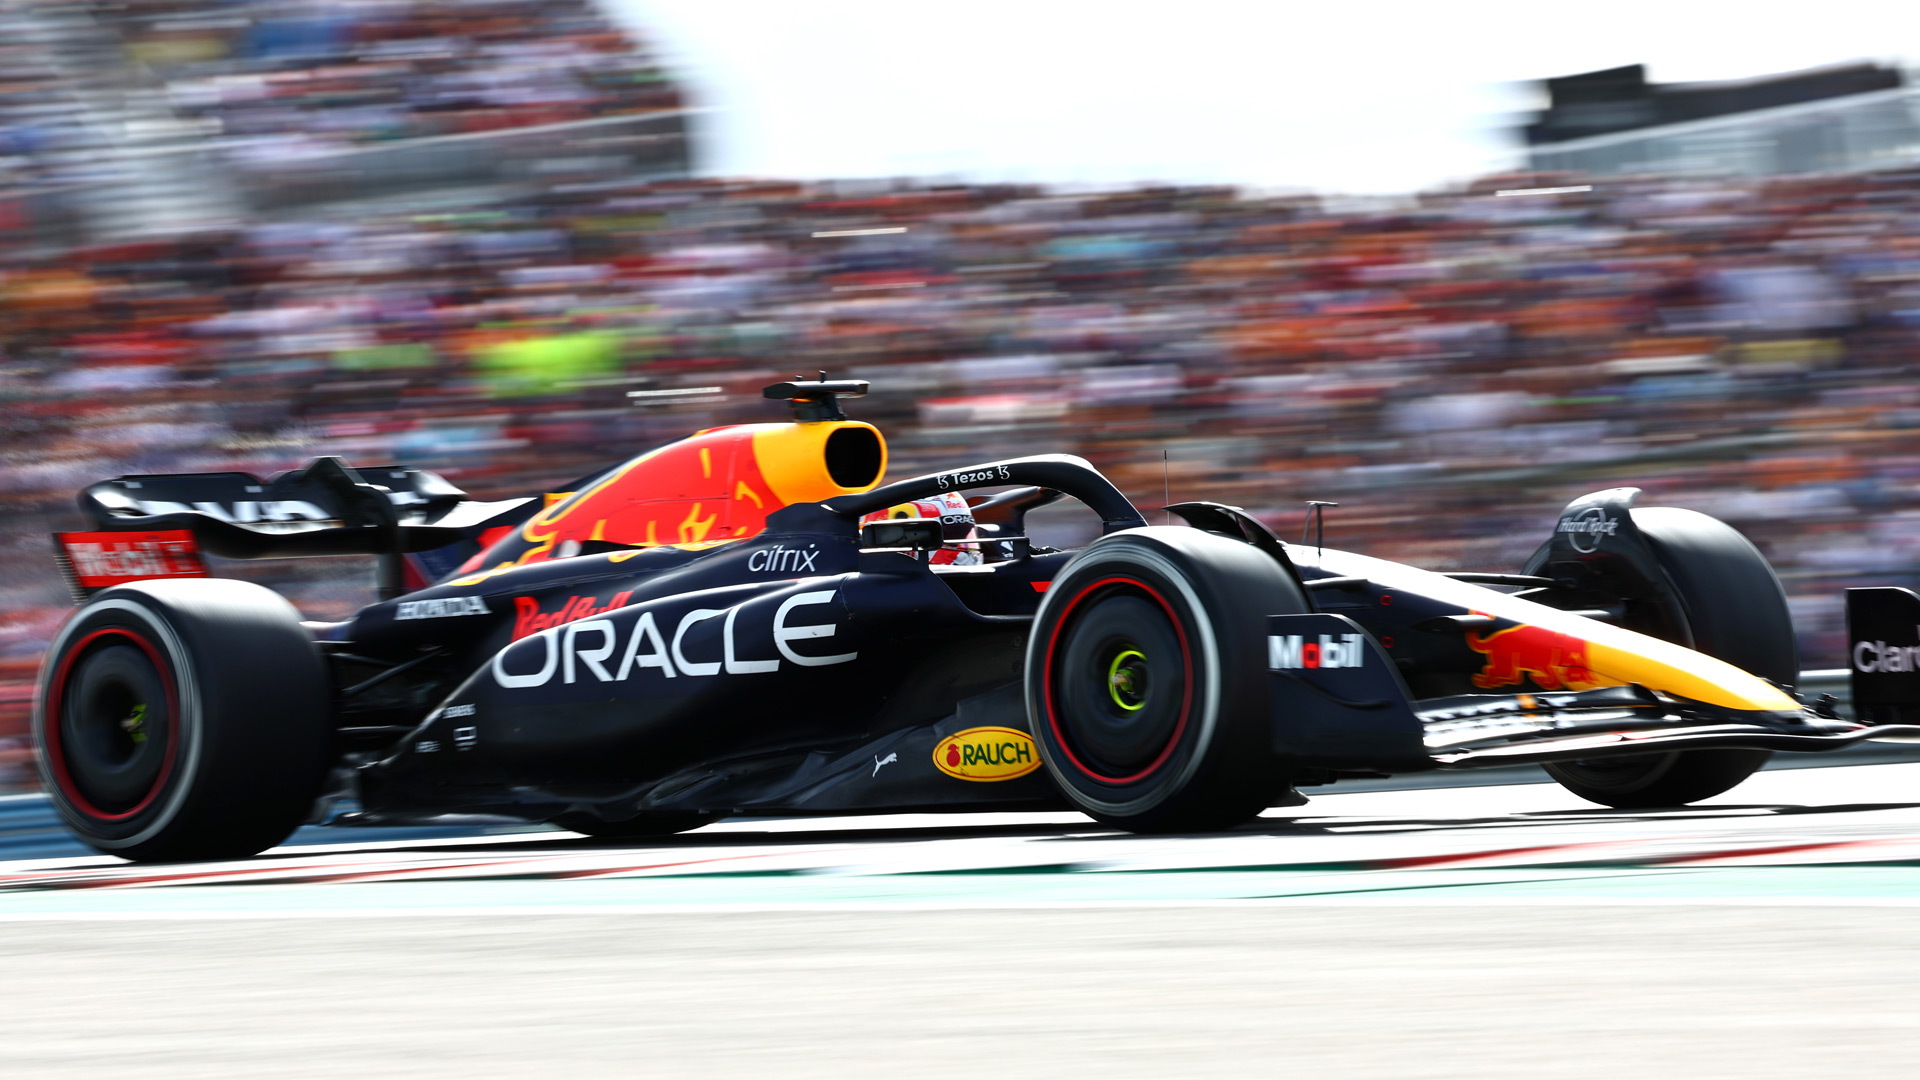 Max Verstappen at the 2022 Formula 1 United States Grand Prix - Photo credit: Getty Images